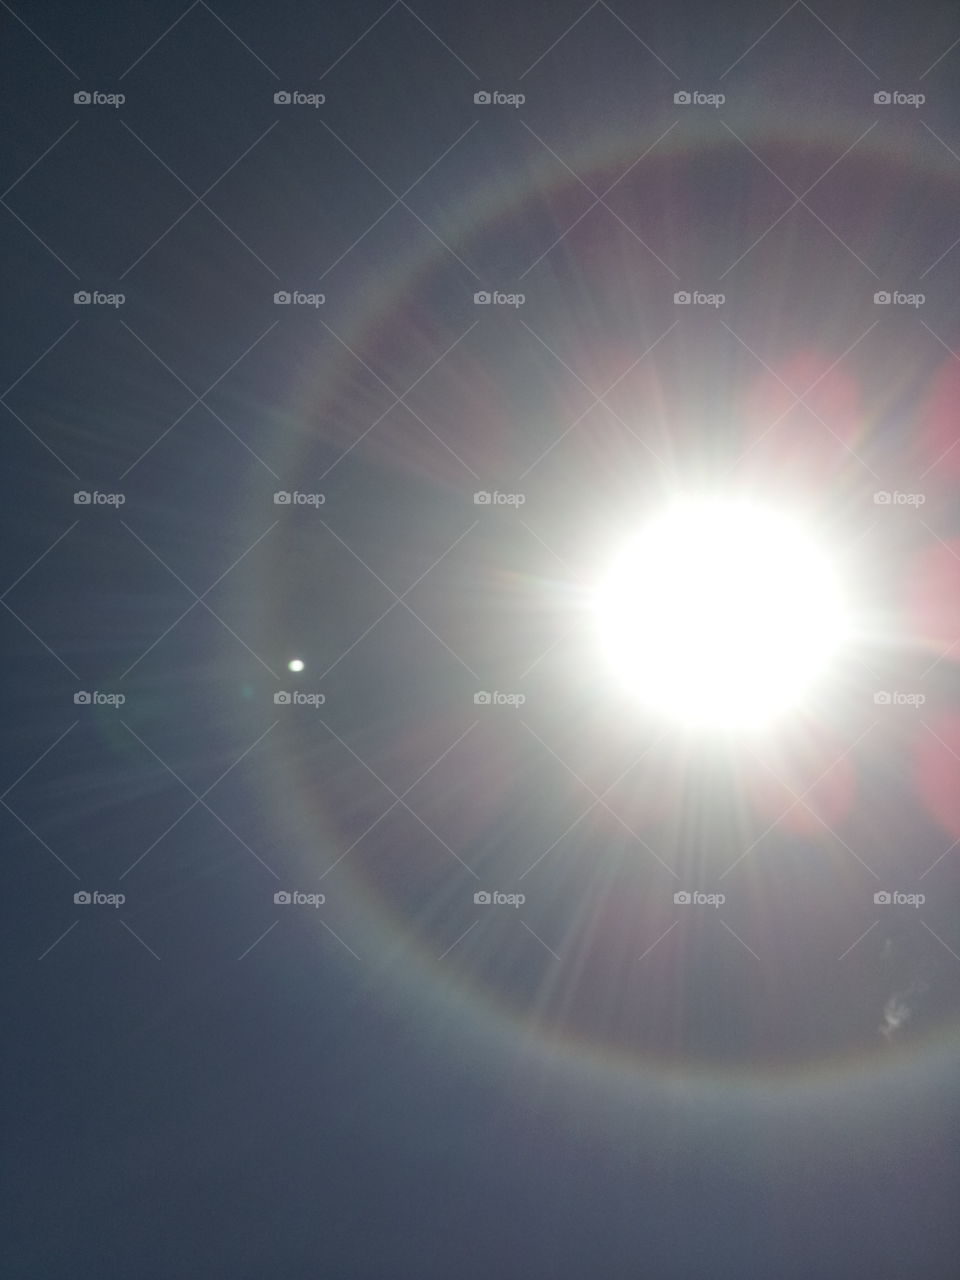 Sun halo seen in Puerto Rico on April 08, 2015 at 12:30 pm.